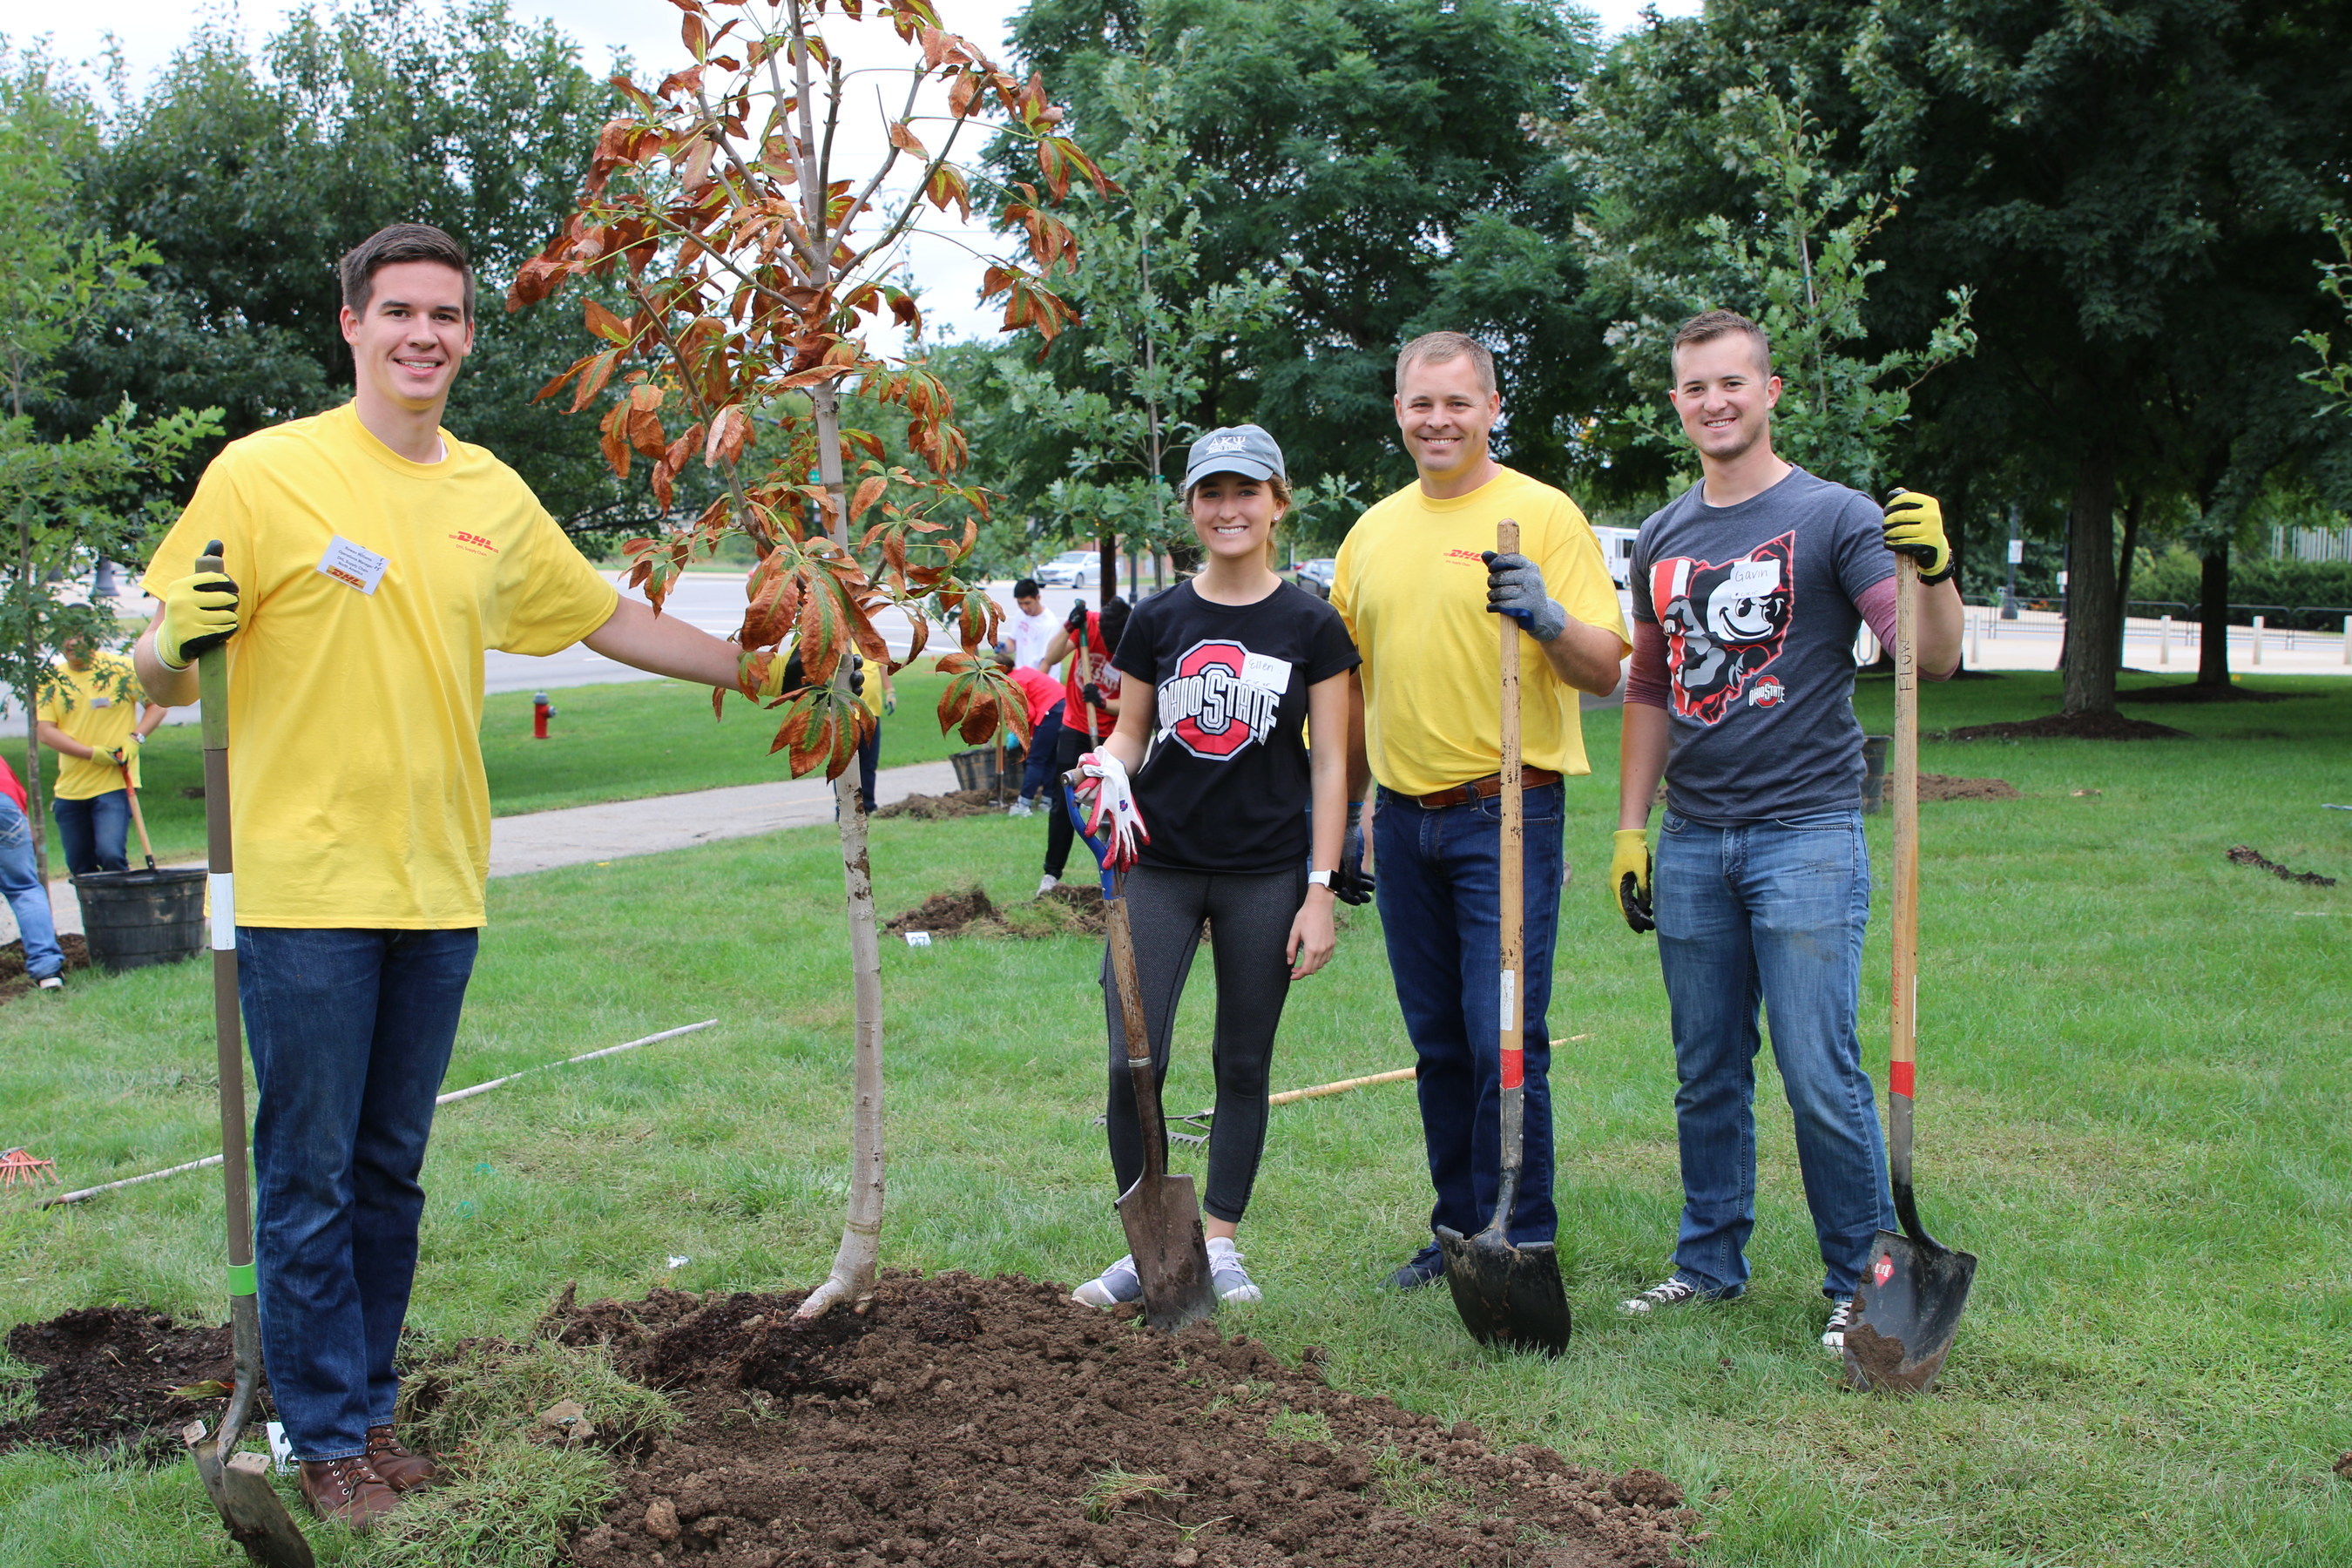 DHL Supply Chain and The Ohio State University partnered to plant 30 trees near the Schottenstein Center. DHL Supply Chain made a contribution to purchase and care for 30 new trees to help support urban forestry in the Columbus area.